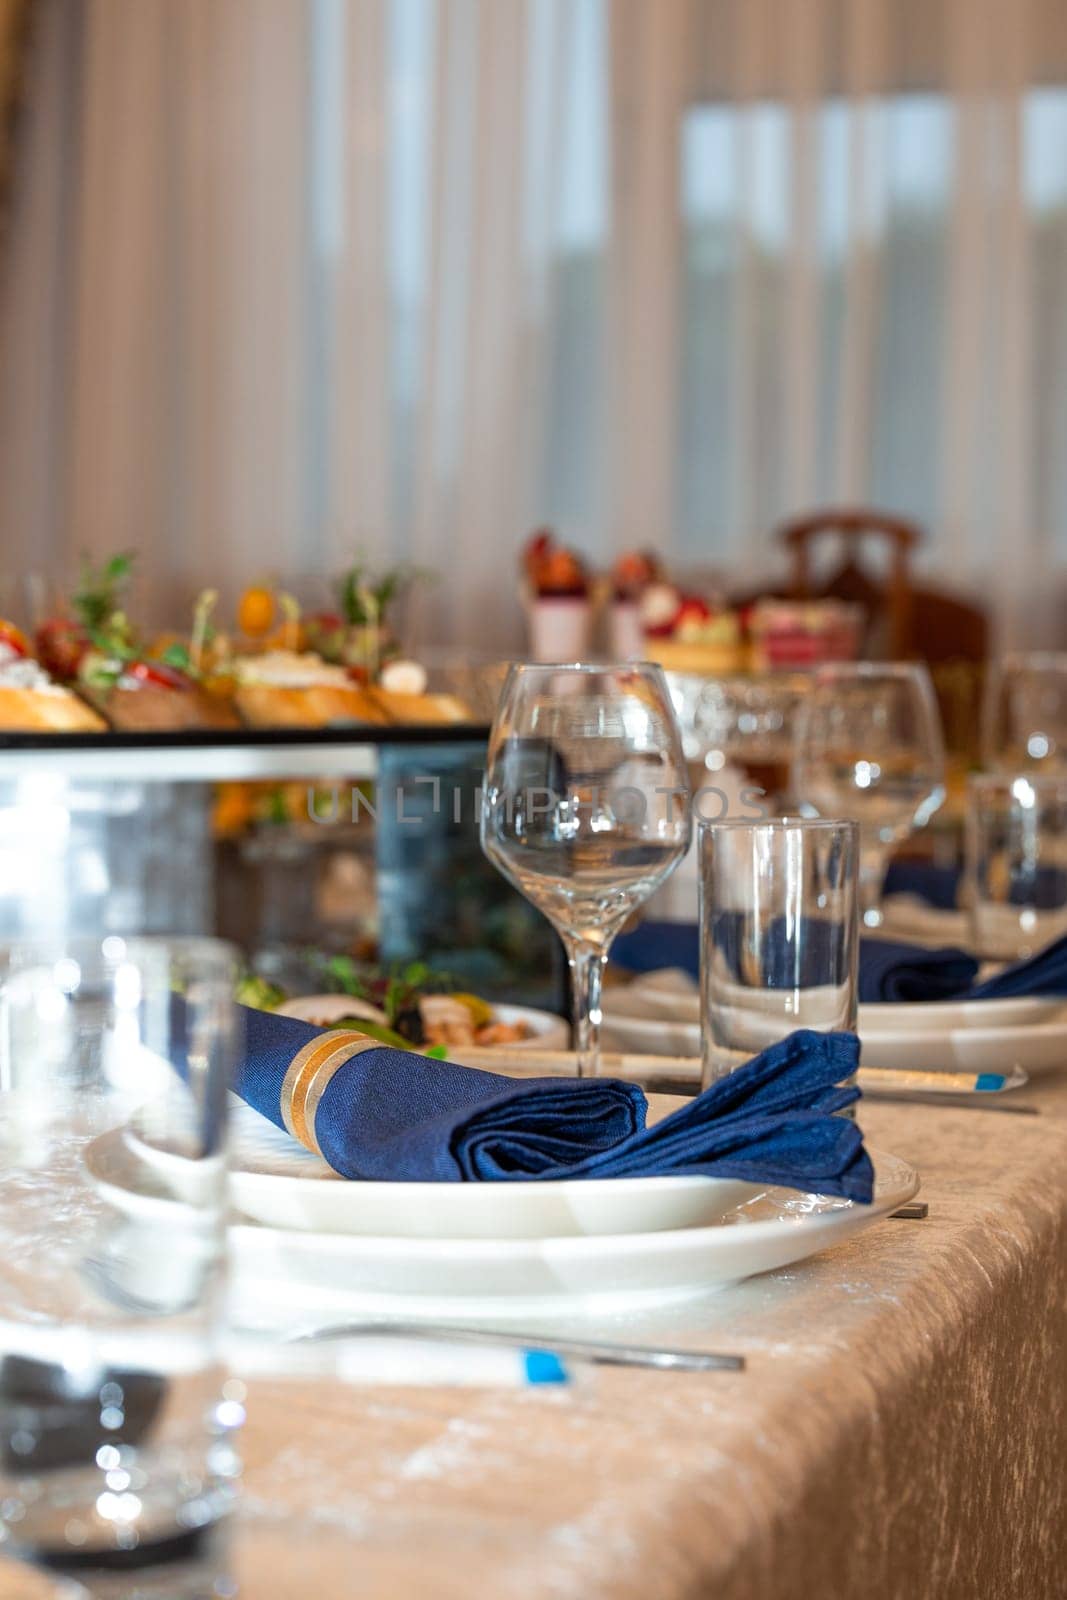 A beautifully set table with a blue napkin, silverware, and a glass of water. The table is decorated with flowers and candles.